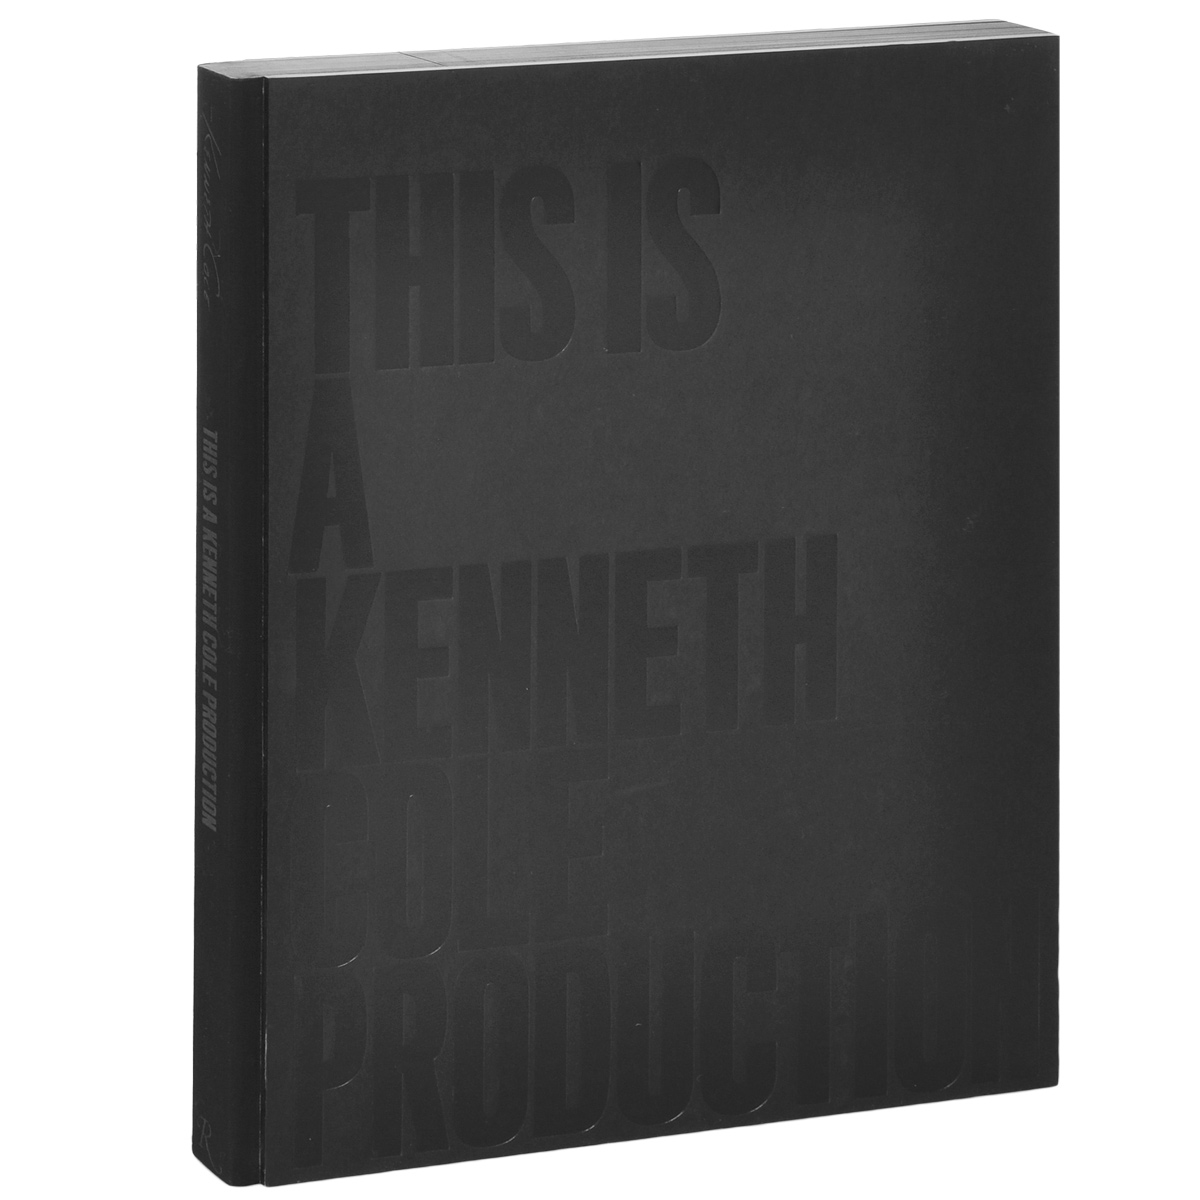 фото This is a Kenneth Cole Production Rizzoli